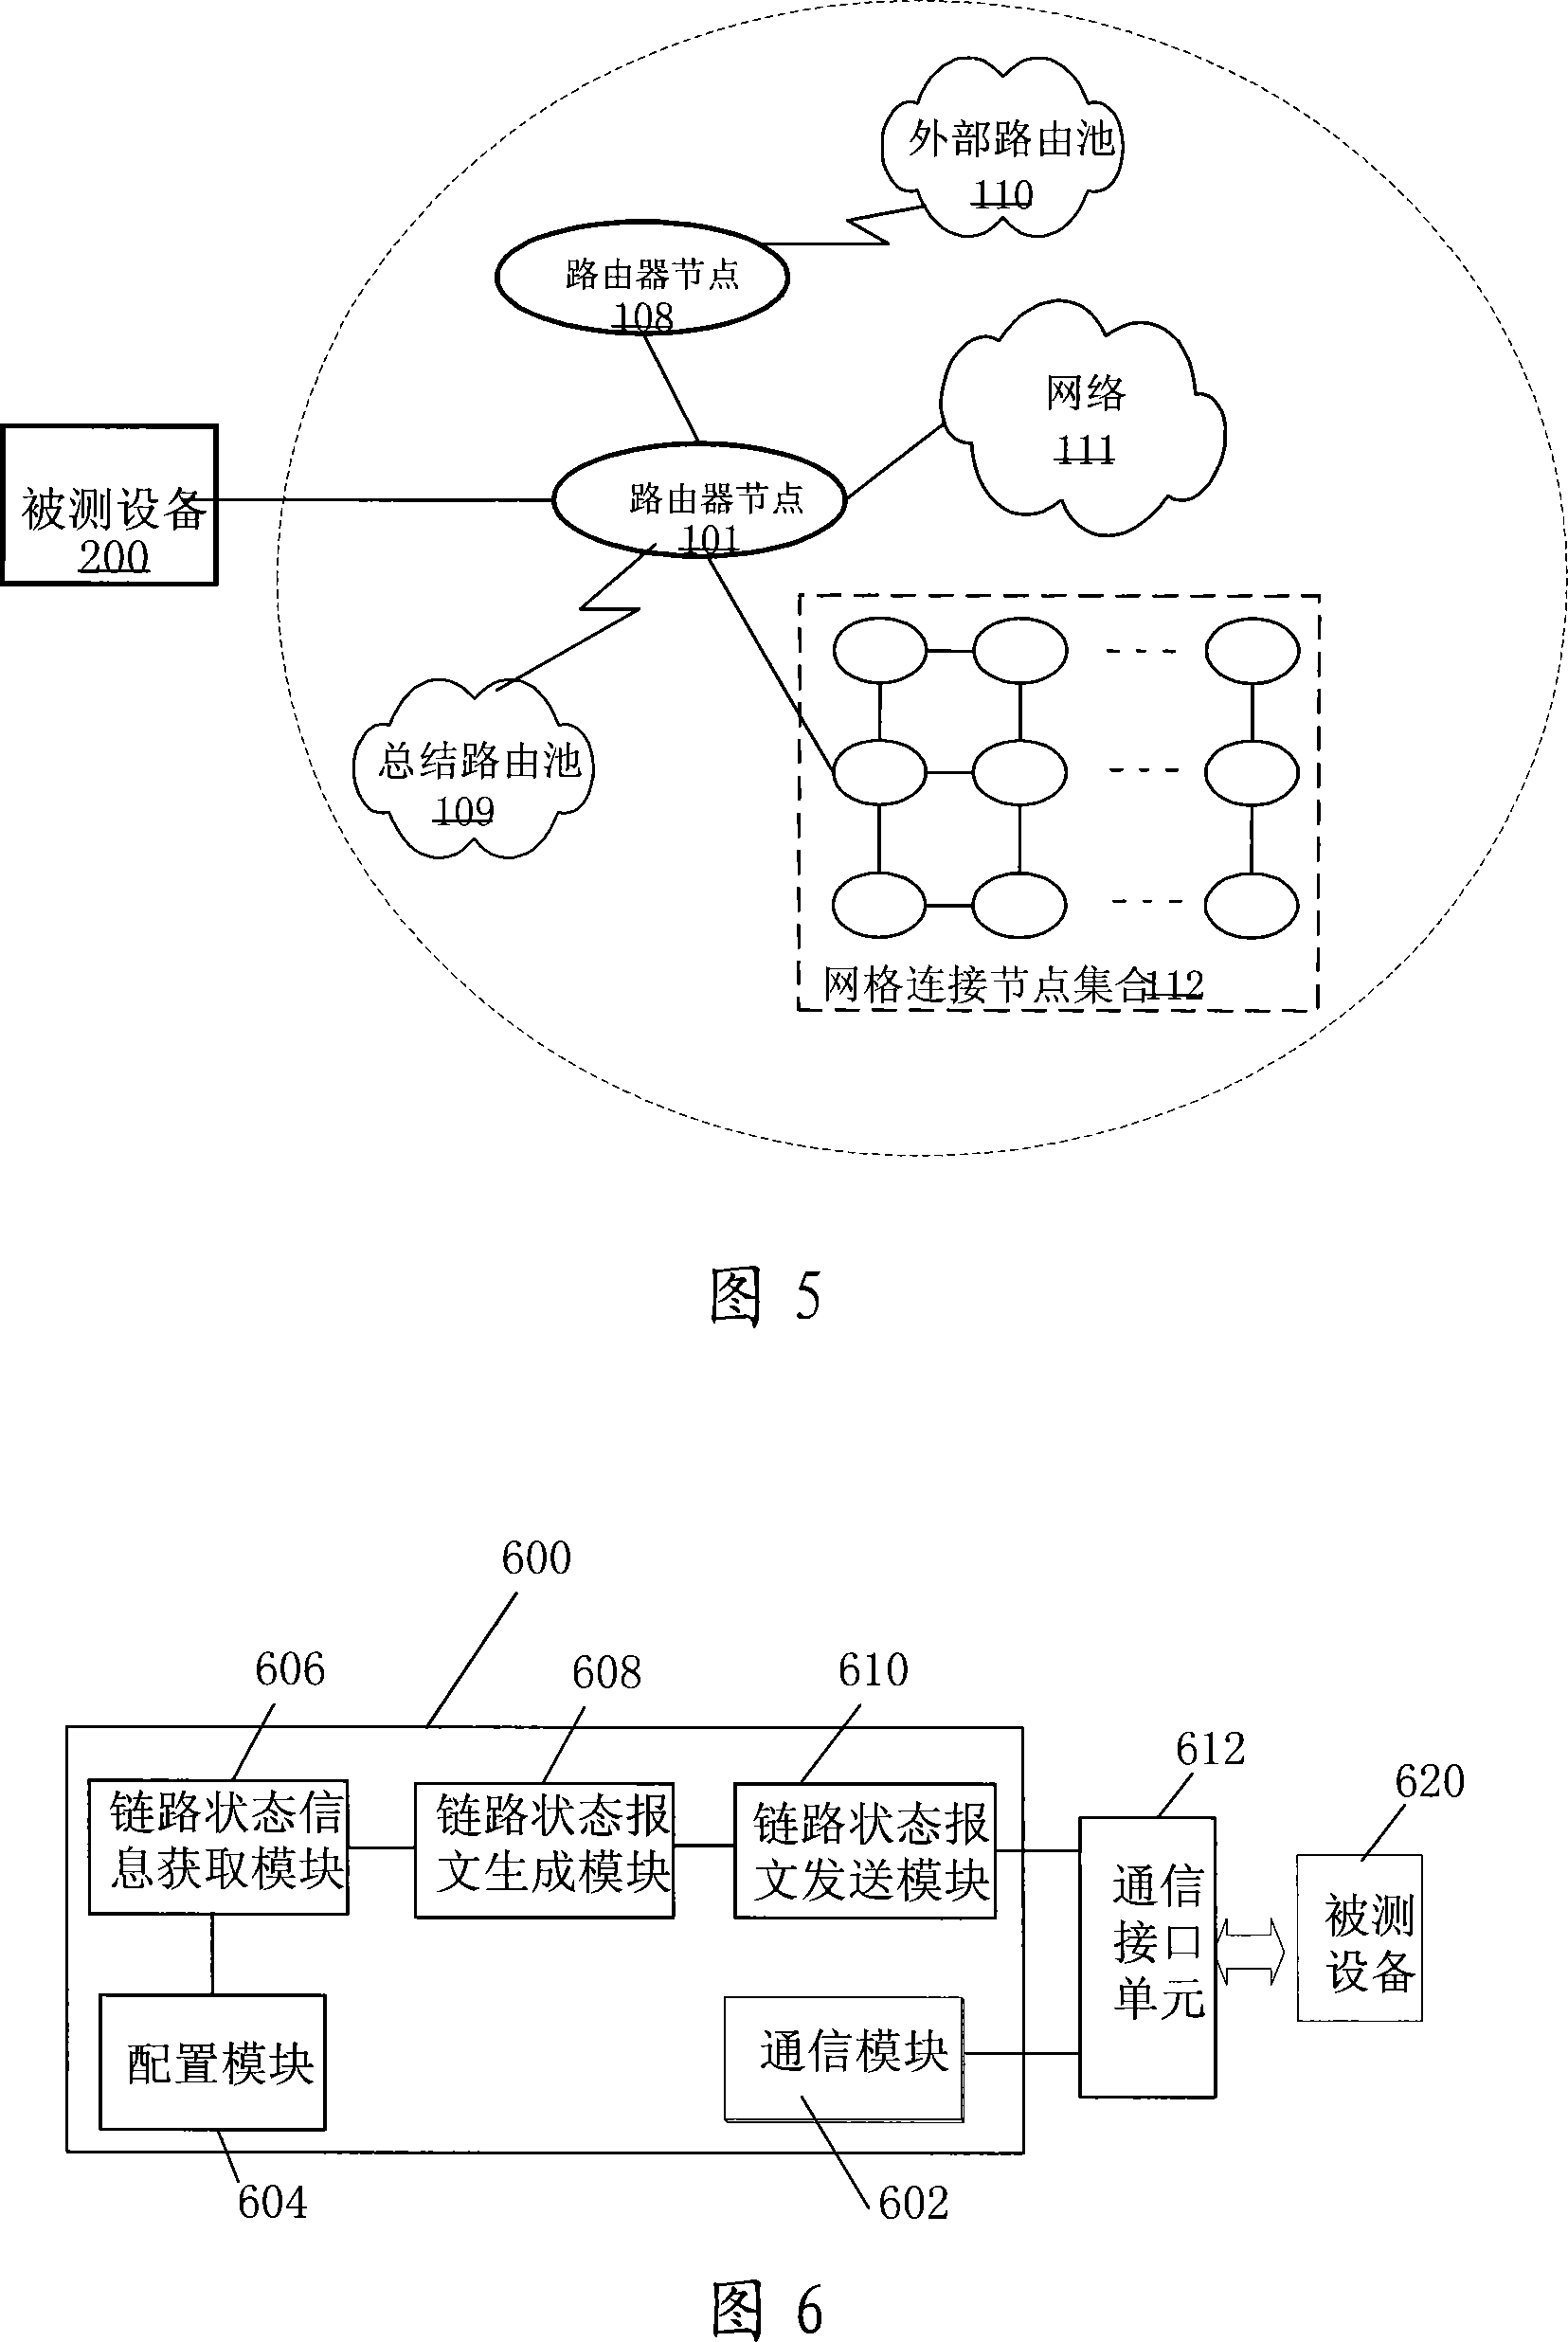 Method, device and system for testing performance of route protocol of network device